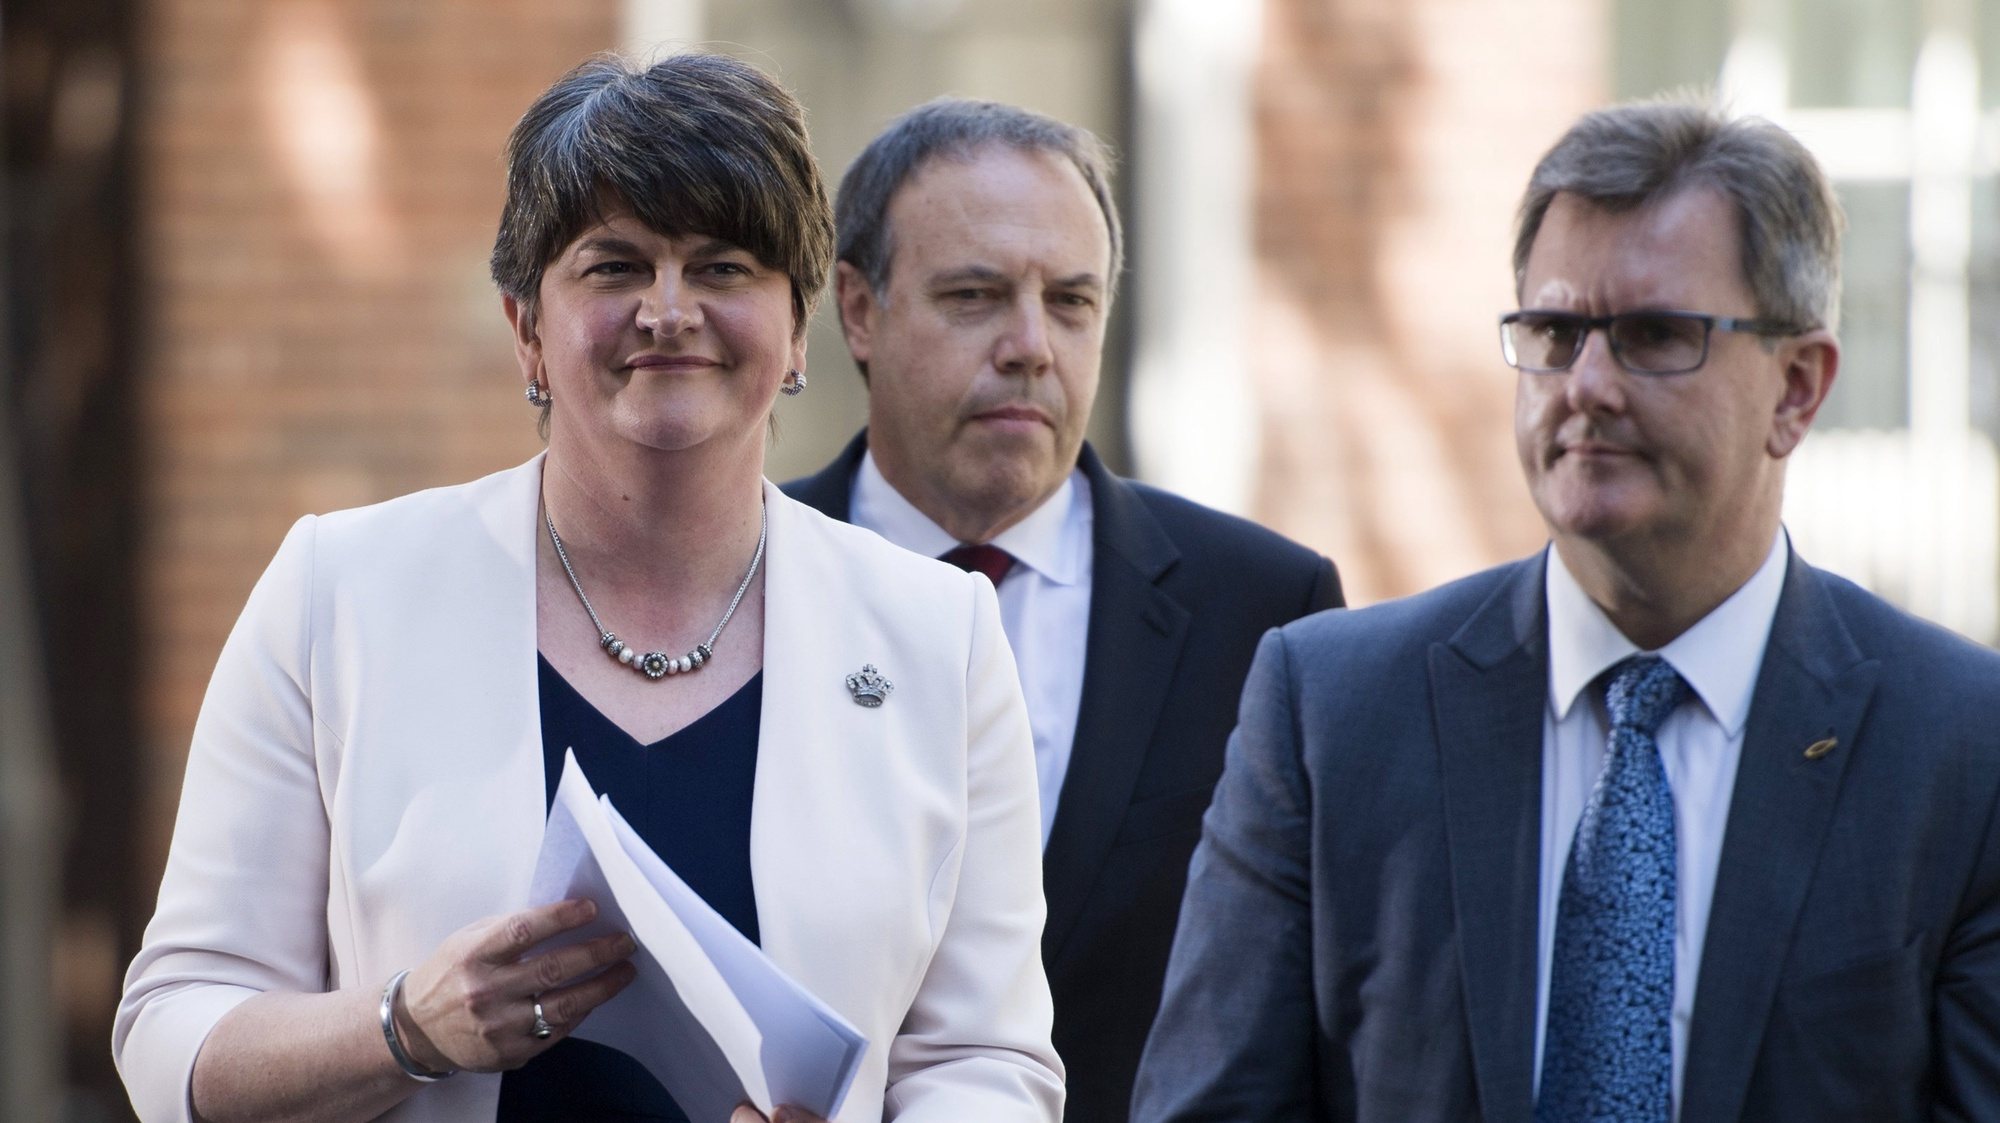 epa06051164 Leader of the Northern Ireland Democratic Unionist Party (DUP) Arlene Foster (L) Deputy Leader Nigel Dodds (C) and Chief Whip Jeffrey Donaldson (R) prepare to address members of the media outside 10 Downing Street, central London, Britain 26 June 2017. It has been announced that the DUP and Conservative party lead by Prime Minister Theresa May have agreed terms for an agreement to form a government.  EPA/WILL OLIVER